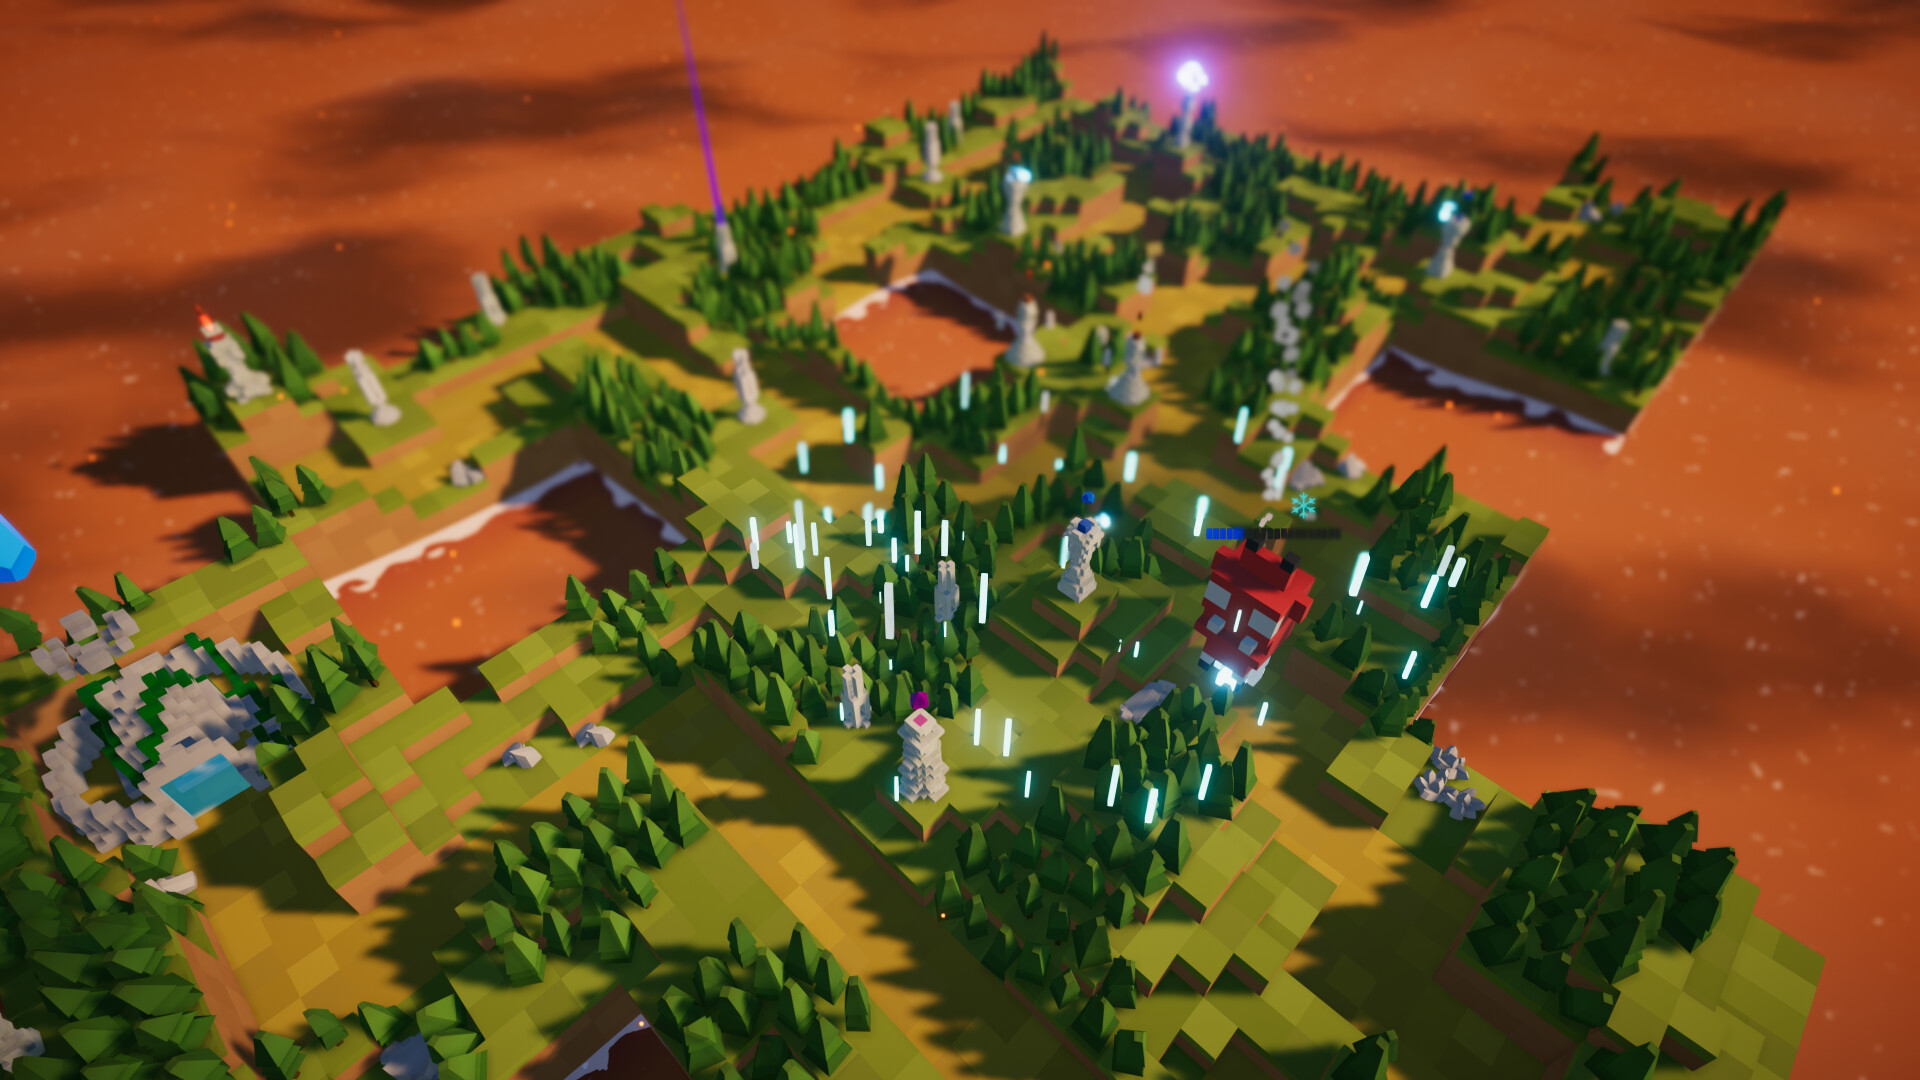 Grassland landscape with multiple big tower like structure. Image is from game Crystal Guardians Prologue.